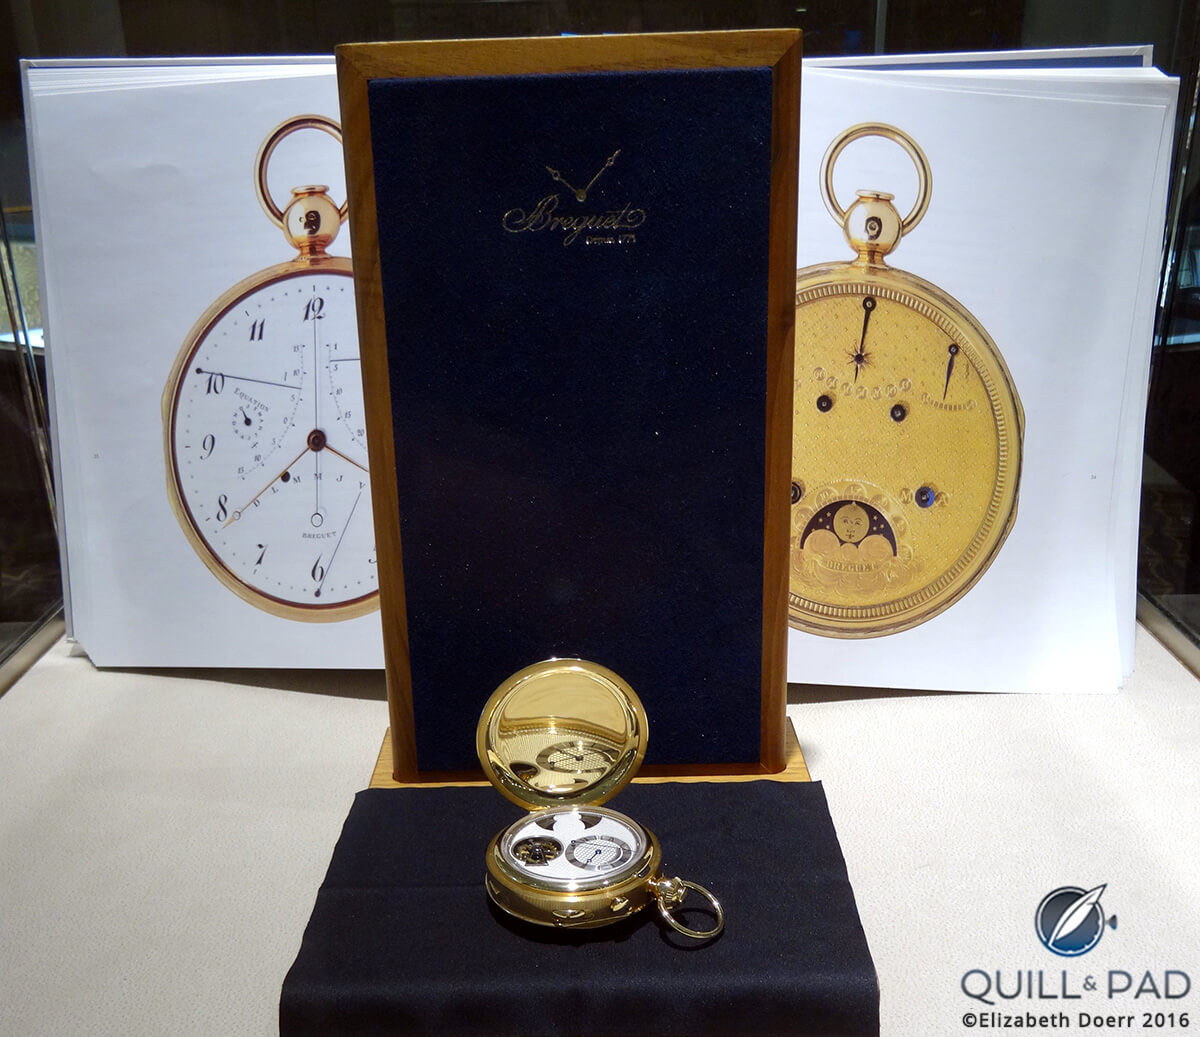 Breguet Reference 1907 pocket watch in display case